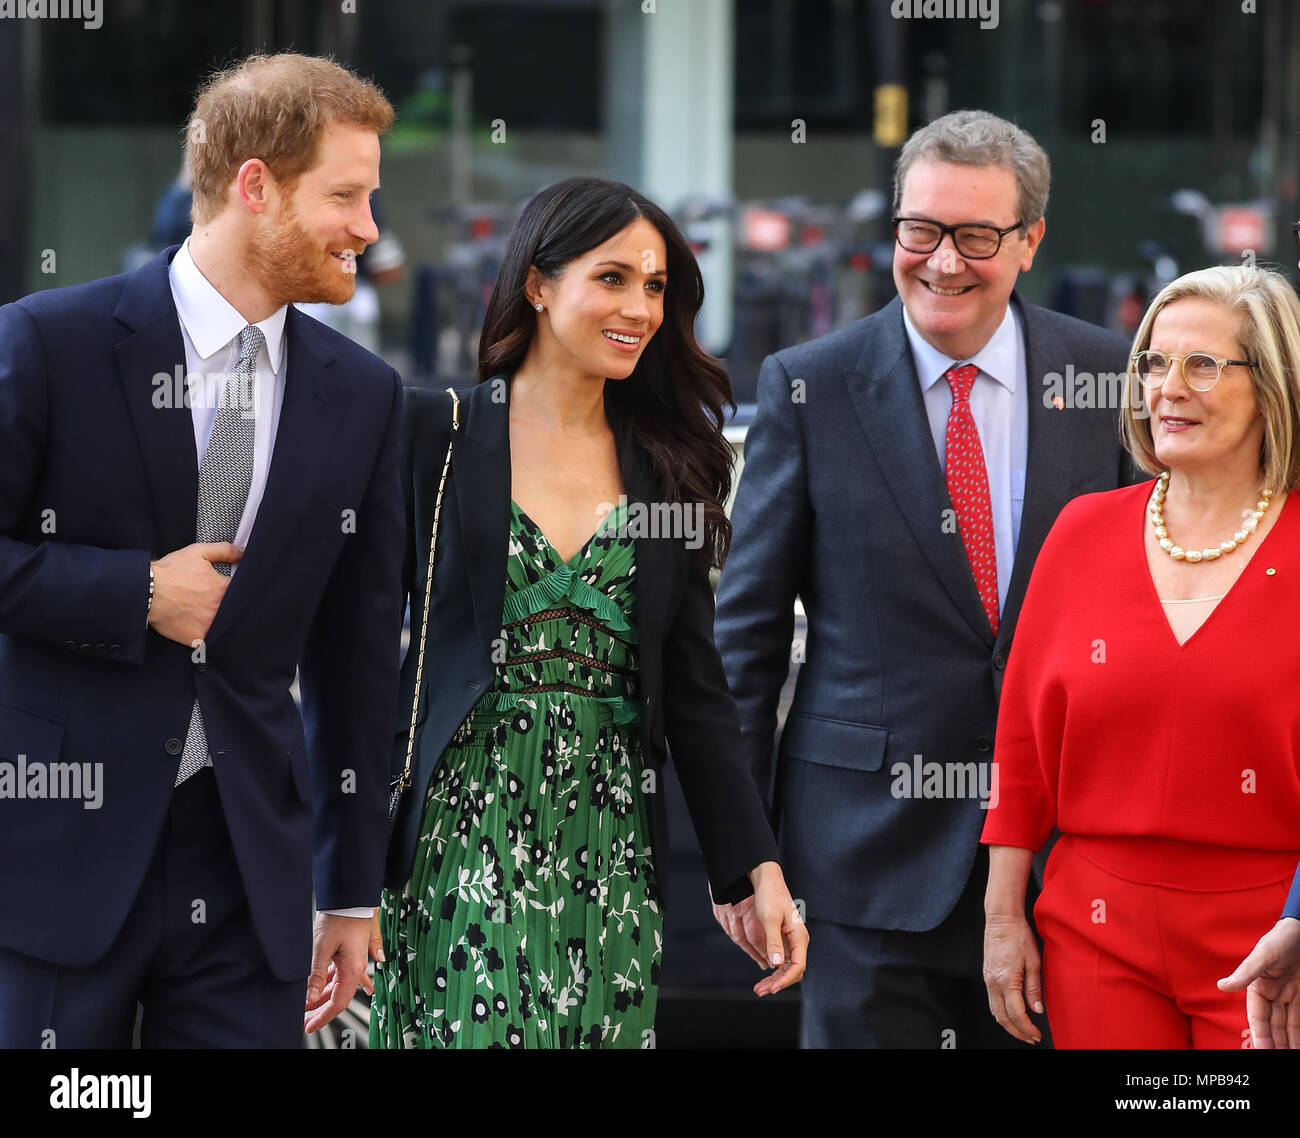 Prince Harry and Meghan Markle arrive at Australia House in London to meet with the Australian High Commissioner in the lead up to Invictus Games.  Featuring: Meghan Markle, Prince Harry, Lucy Turnbull, Alexander Downer Where: London, United Kingdom When: 21 Apr 2018 Credit: John Rainford/WENN.com Stock Photo